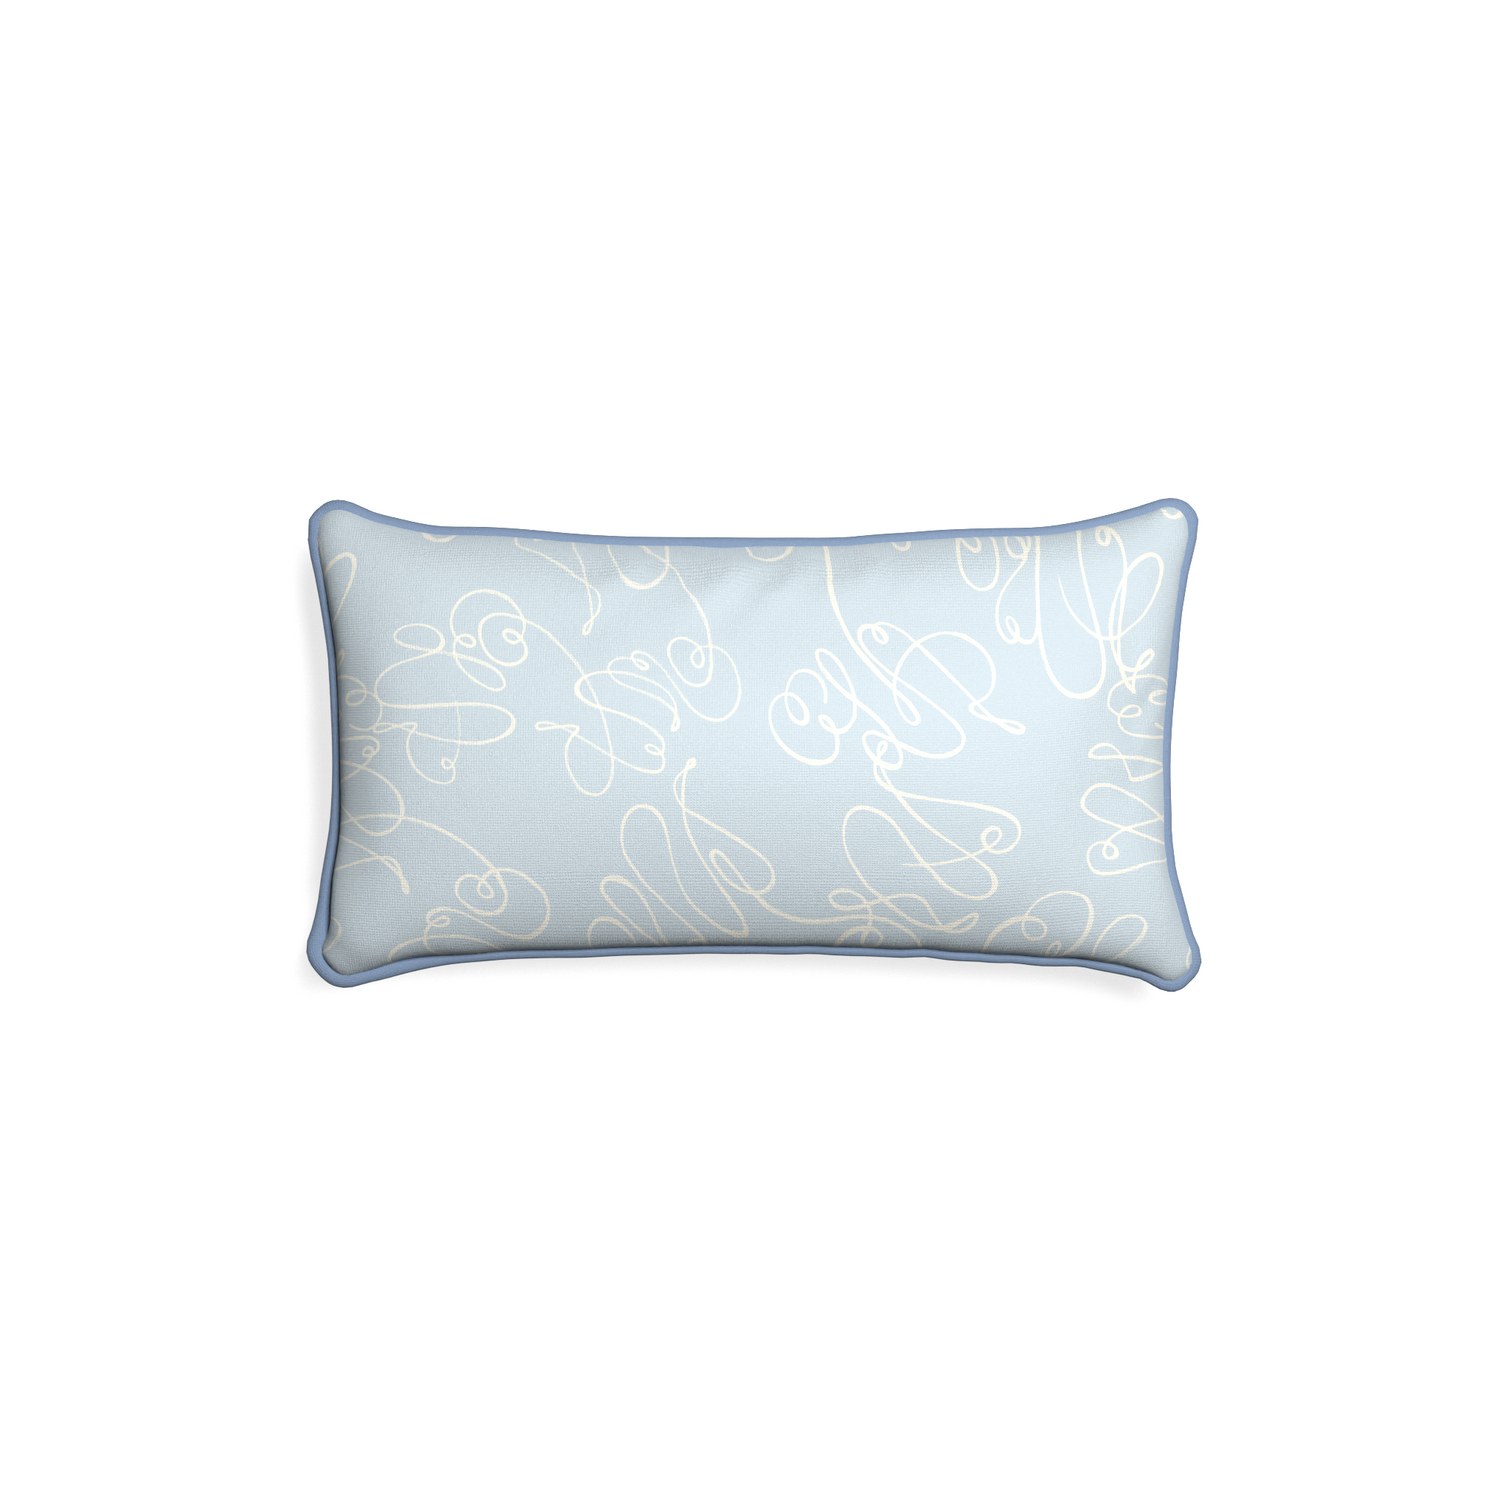 Petite-lumbar mirabella custom powder blue abstractpillow with sky piping on white background